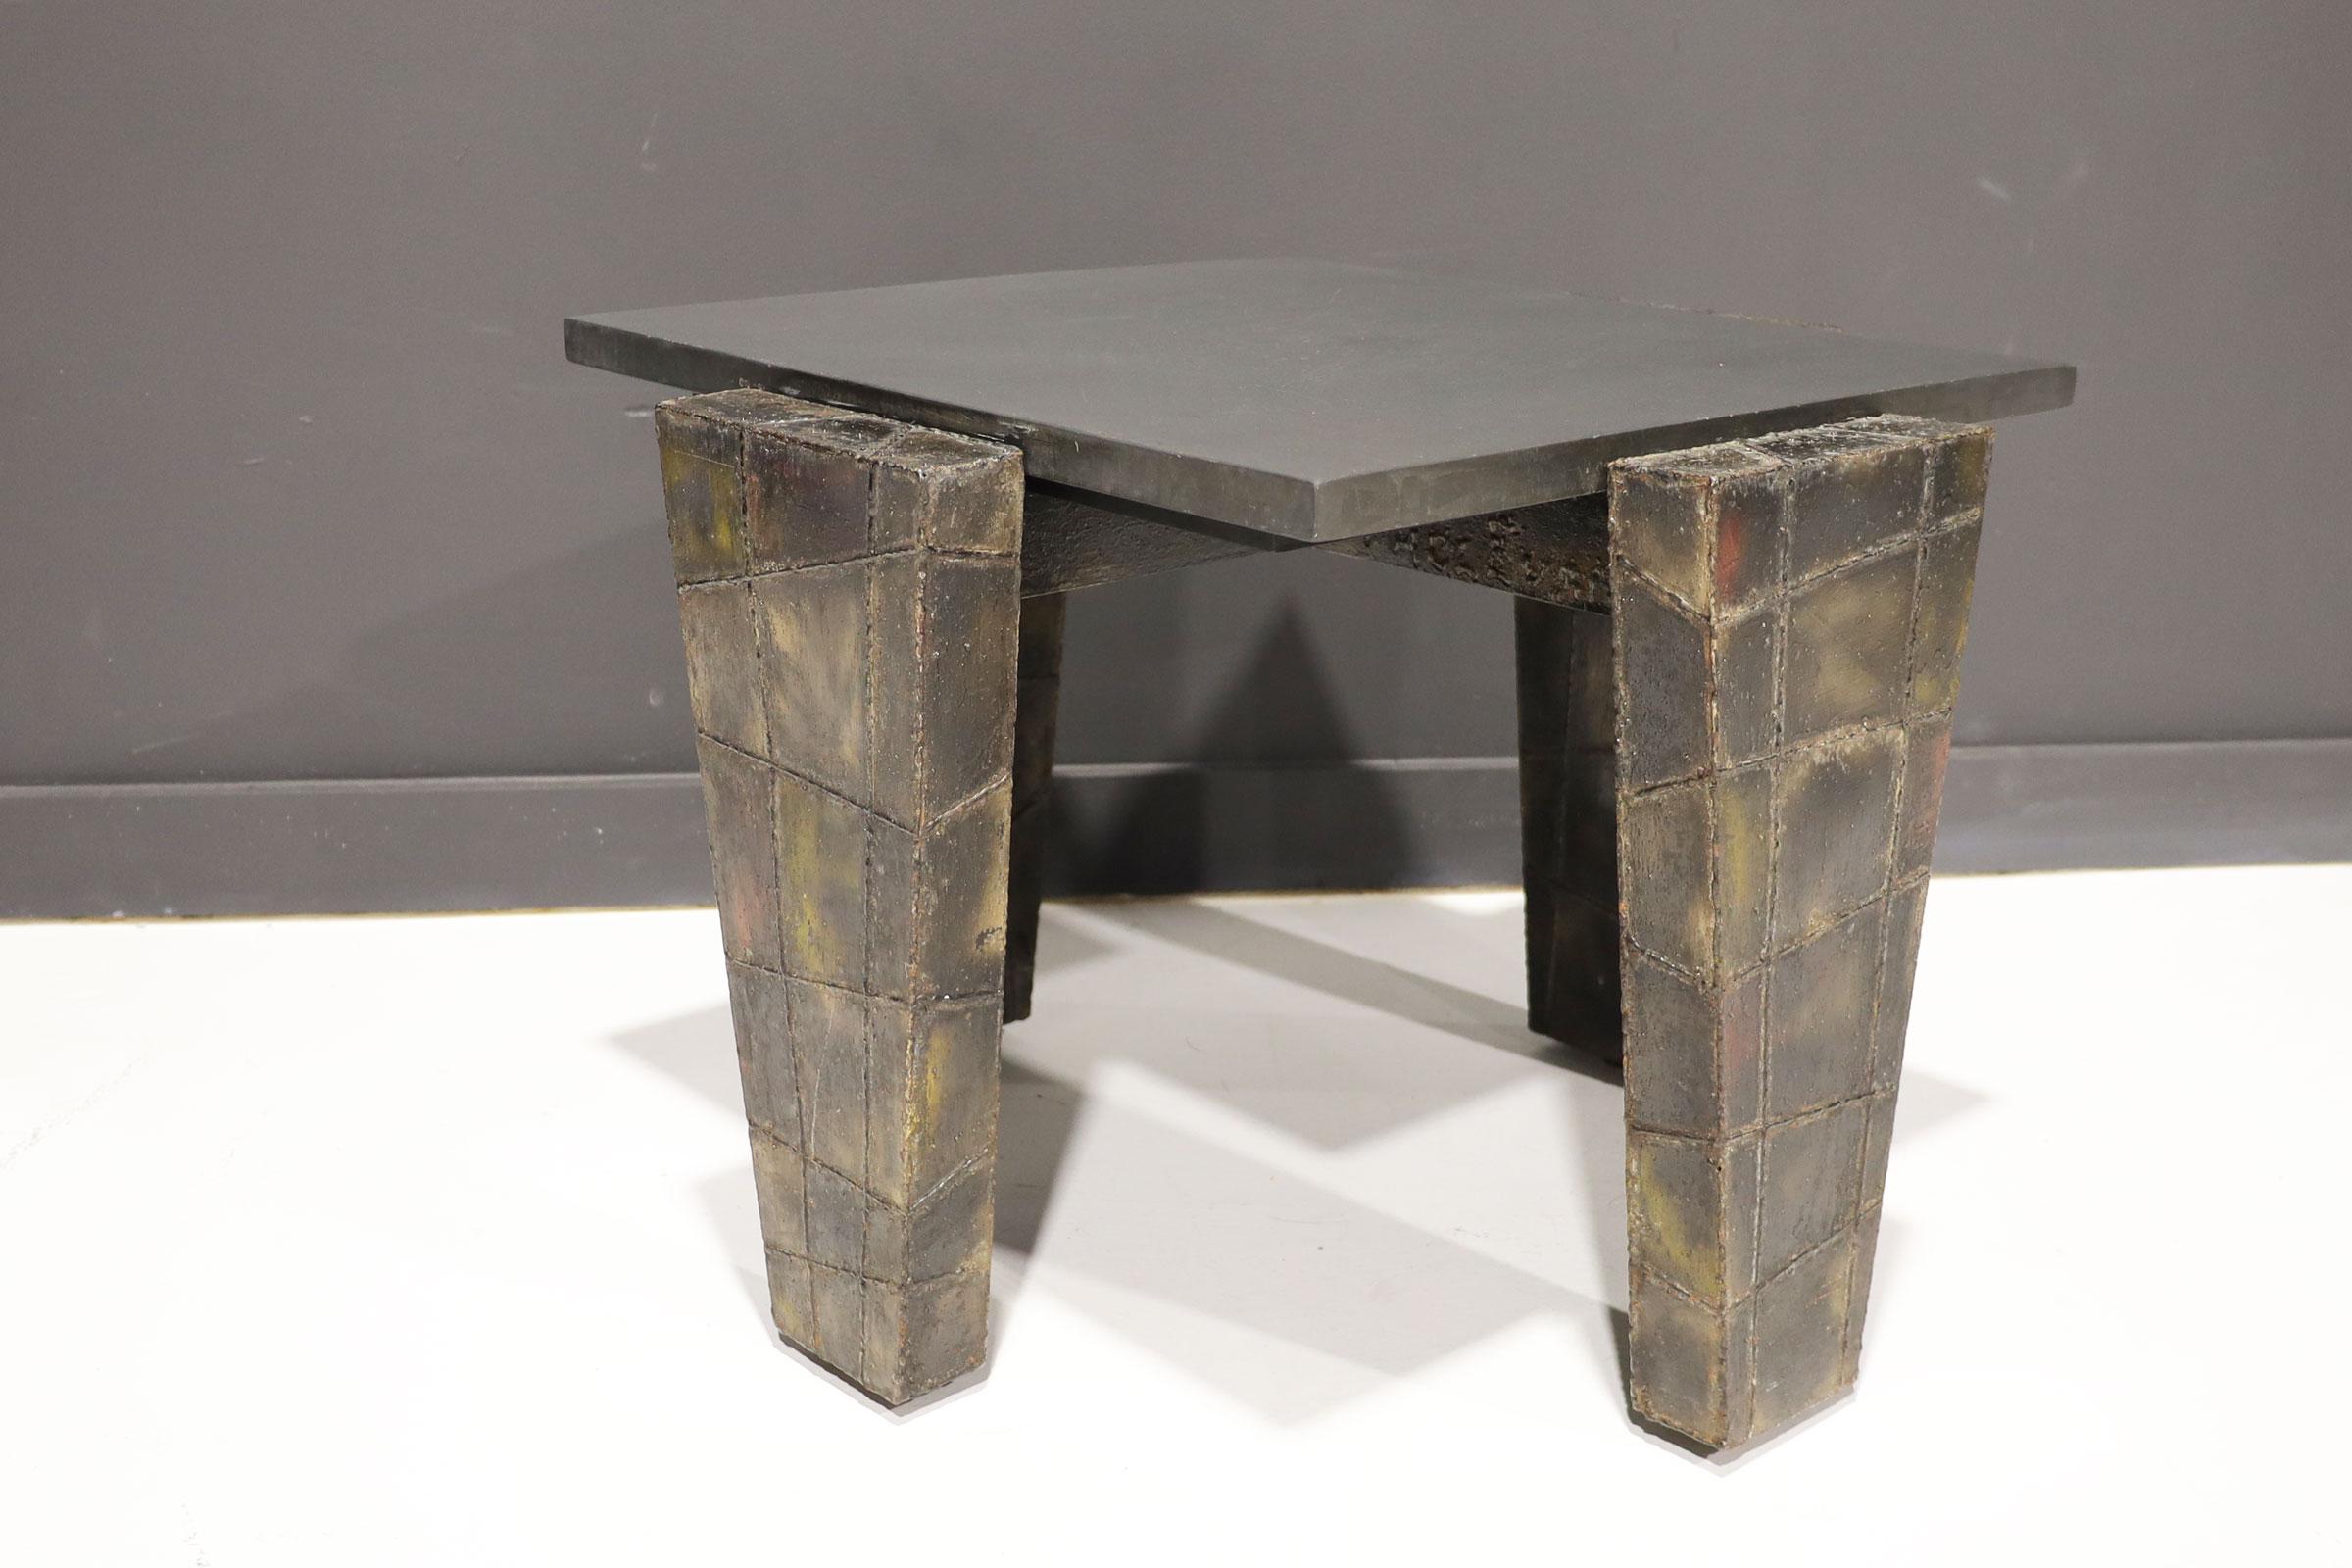 20th Century Paul Evans Brutalist Side Table Welded Metal and Slate Top, Signed and dtd 1977 For Sale